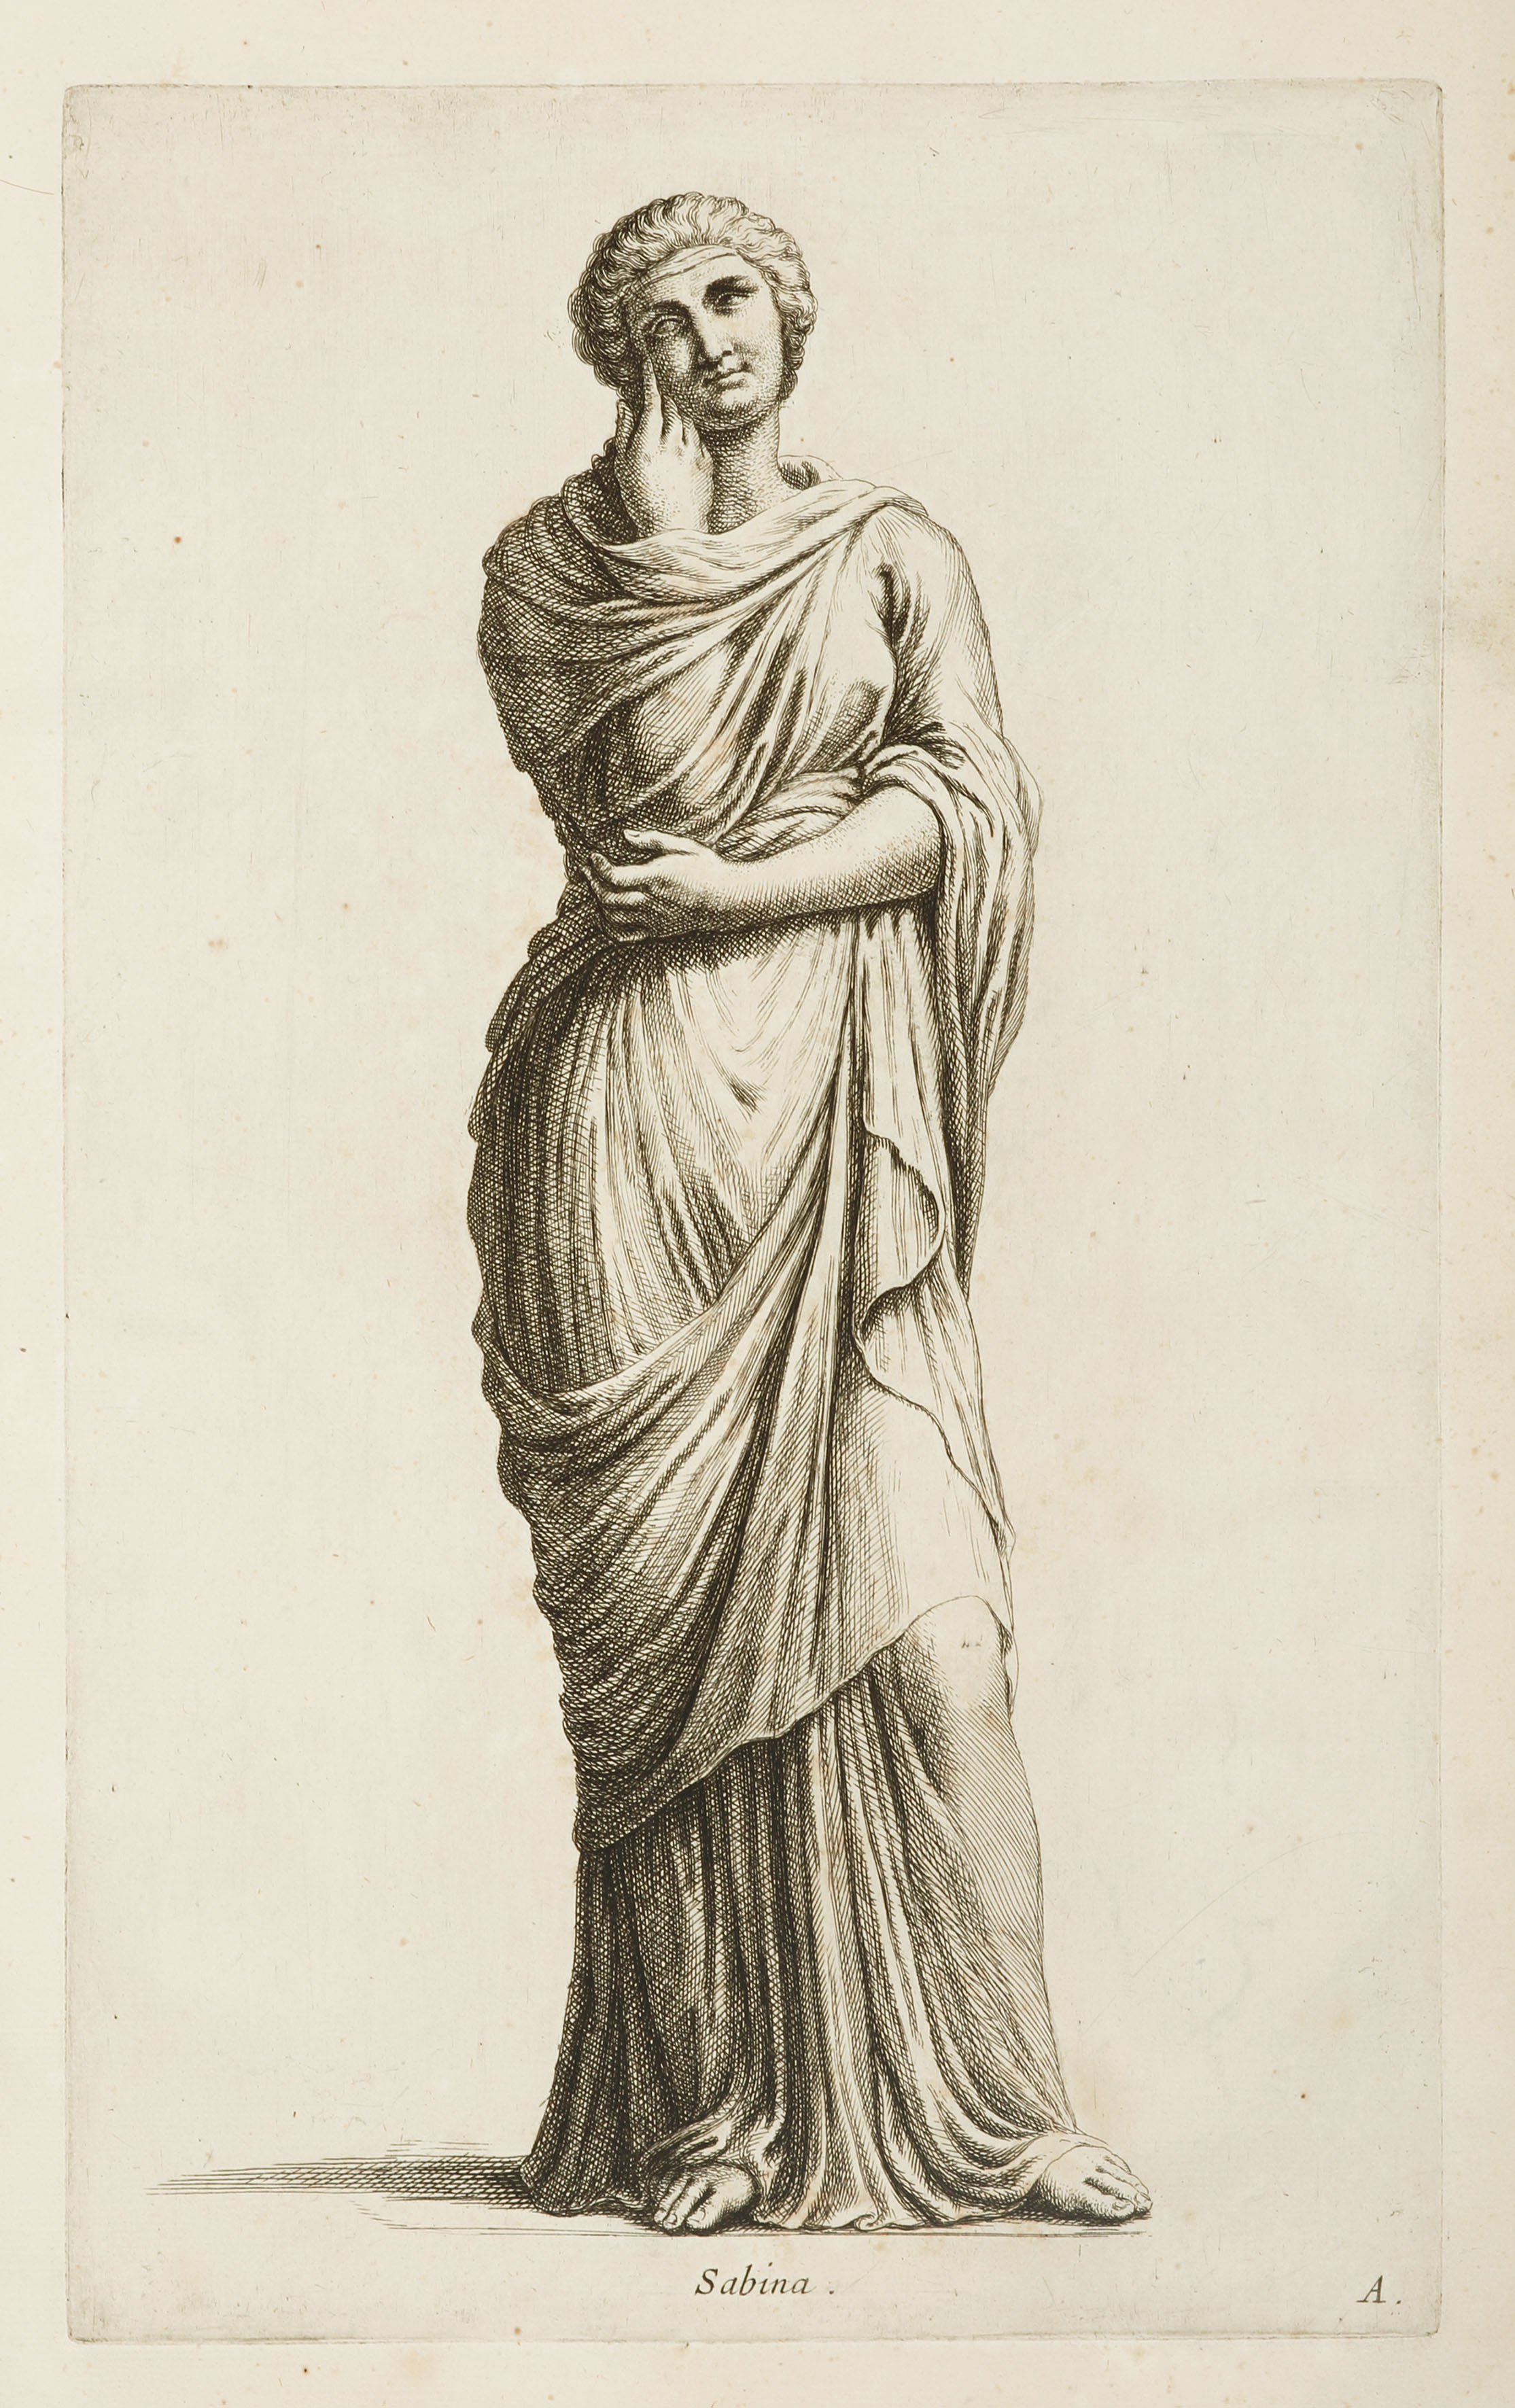 Sabina - Antique Print from 1671